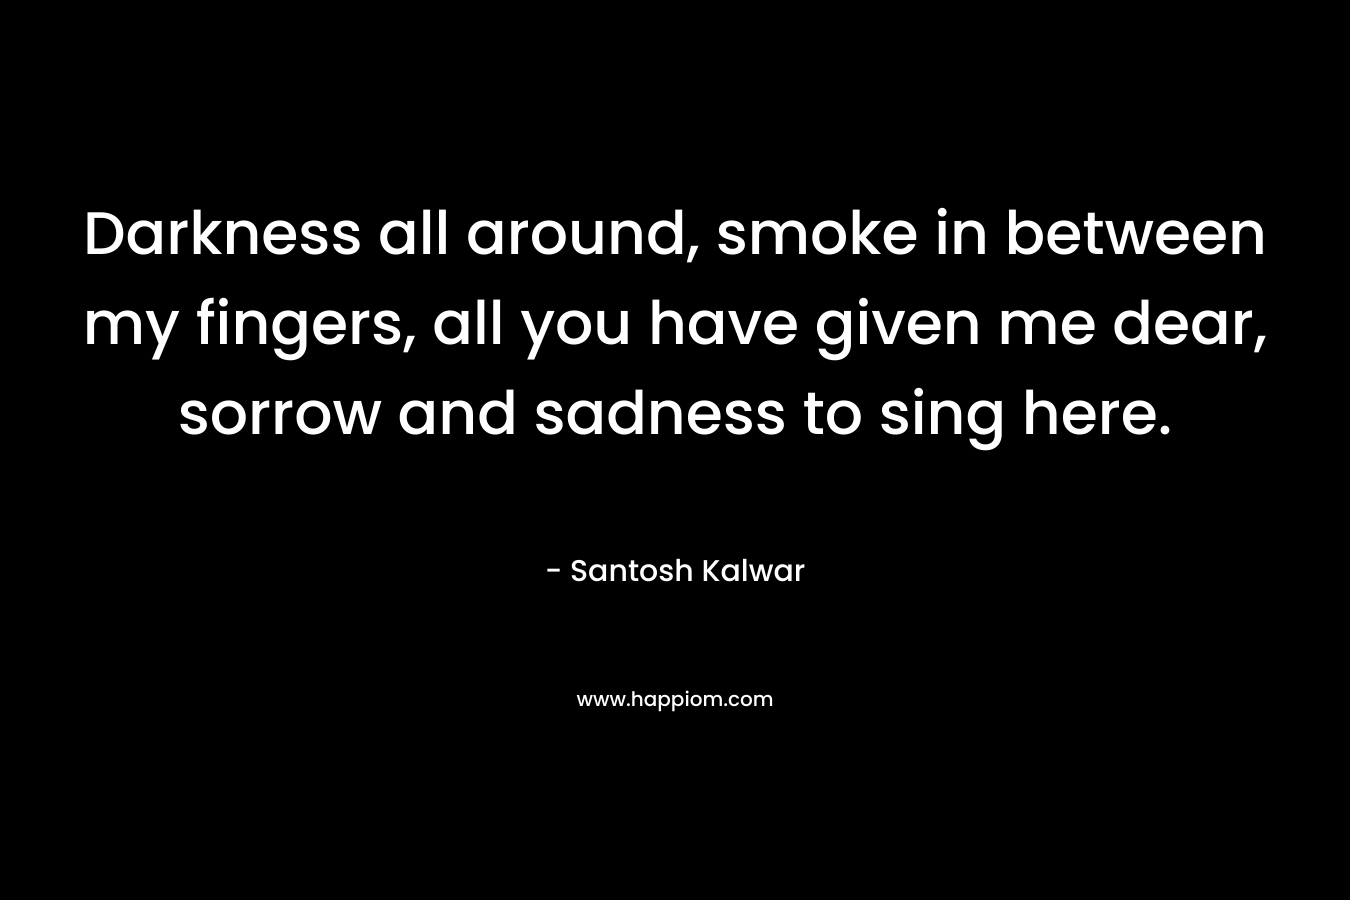 Darkness all around, smoke in between my fingers, all you have given me dear, sorrow and sadness to sing here.